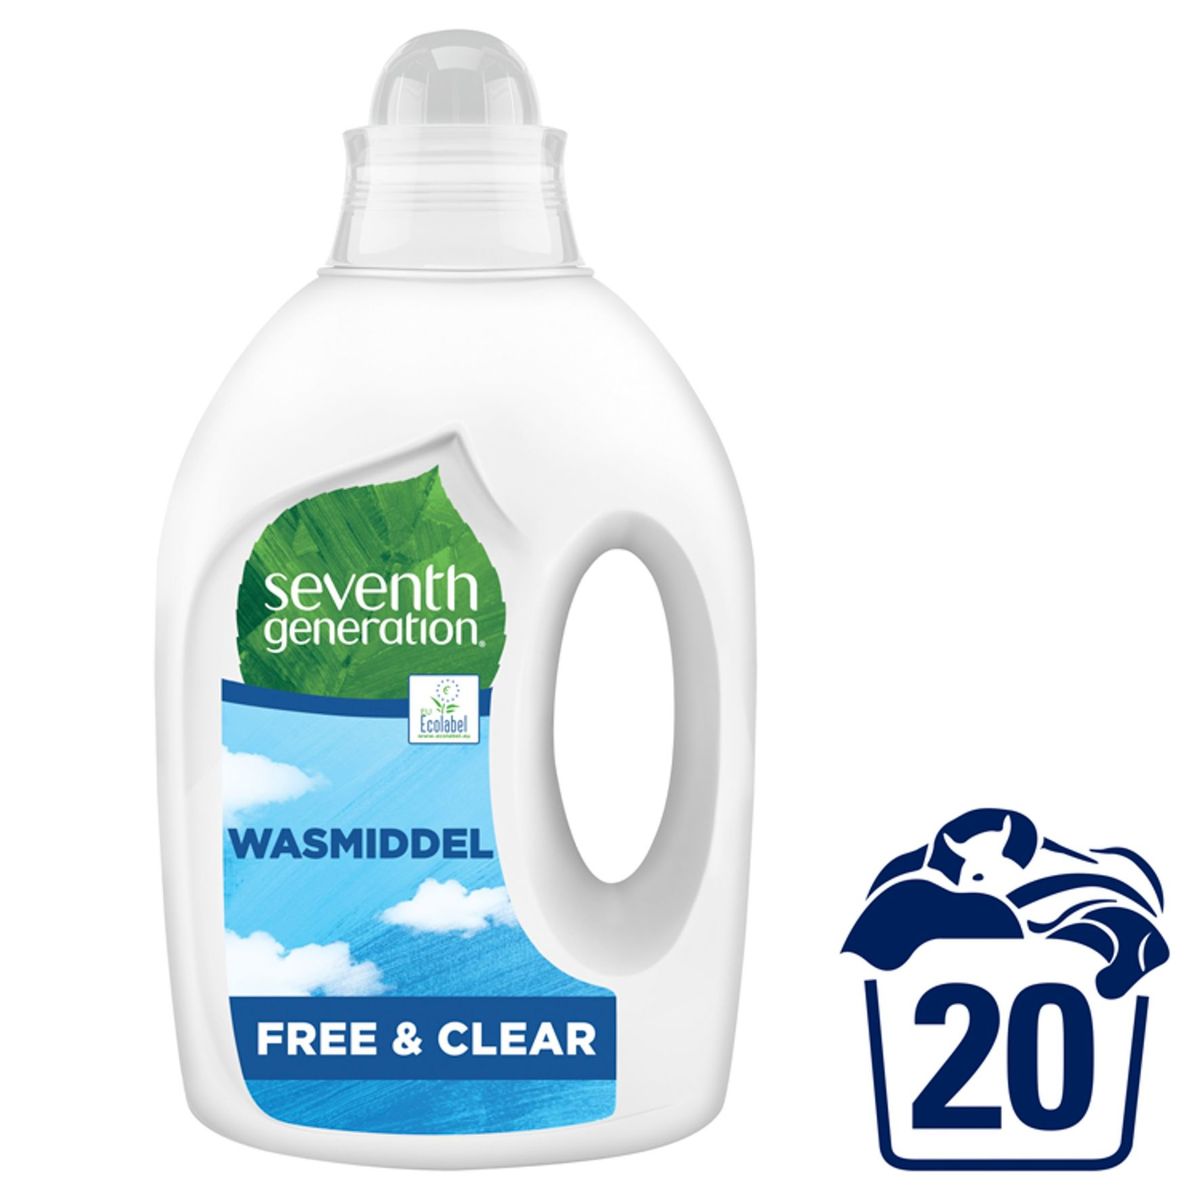 Seventh Generation Lessive Free and Clear 1 L